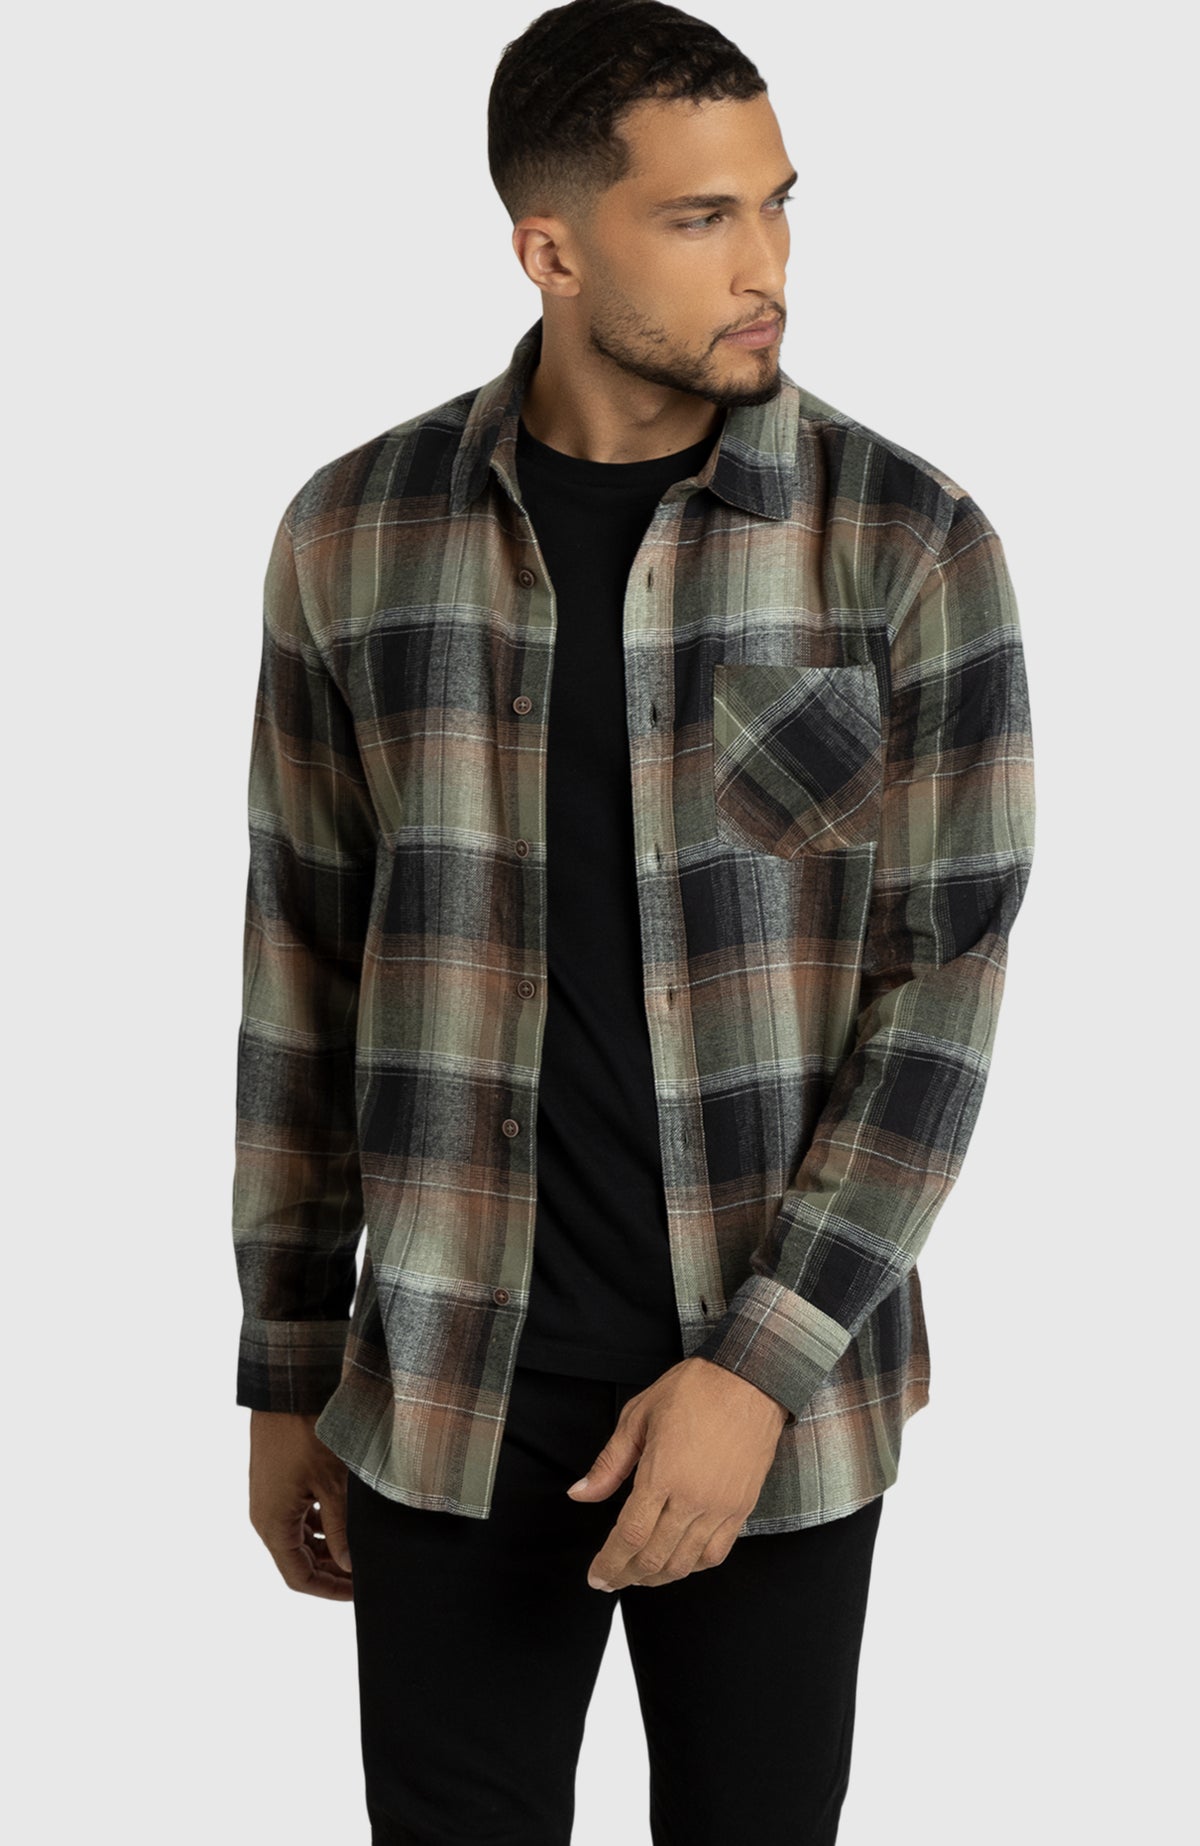 Dusty Olive Plaid Flannel Shirt for Men - Front